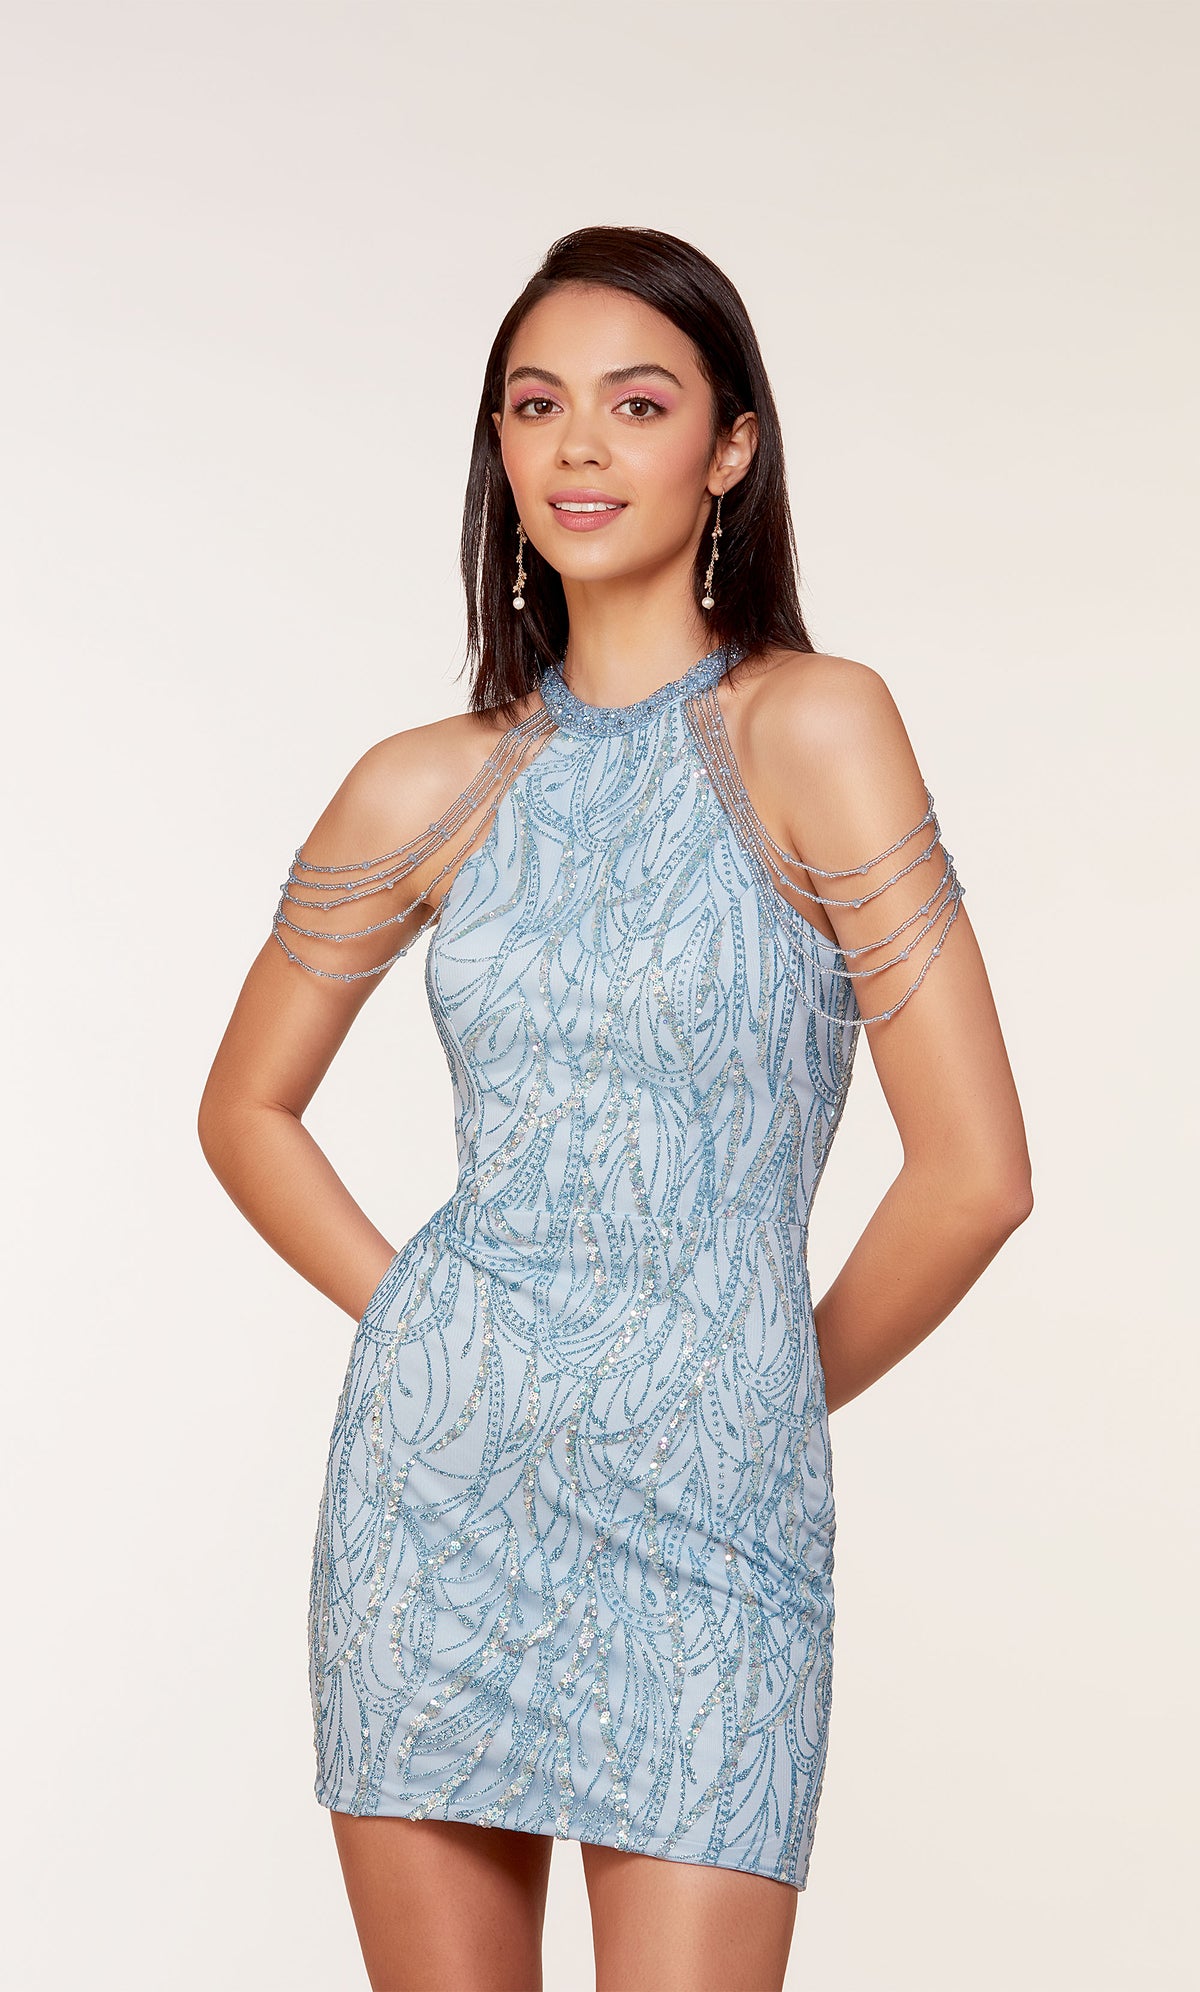 A unique short glacier blue dress featuring golden glitter embellishments, a high neckline, and hand-beaded accents.